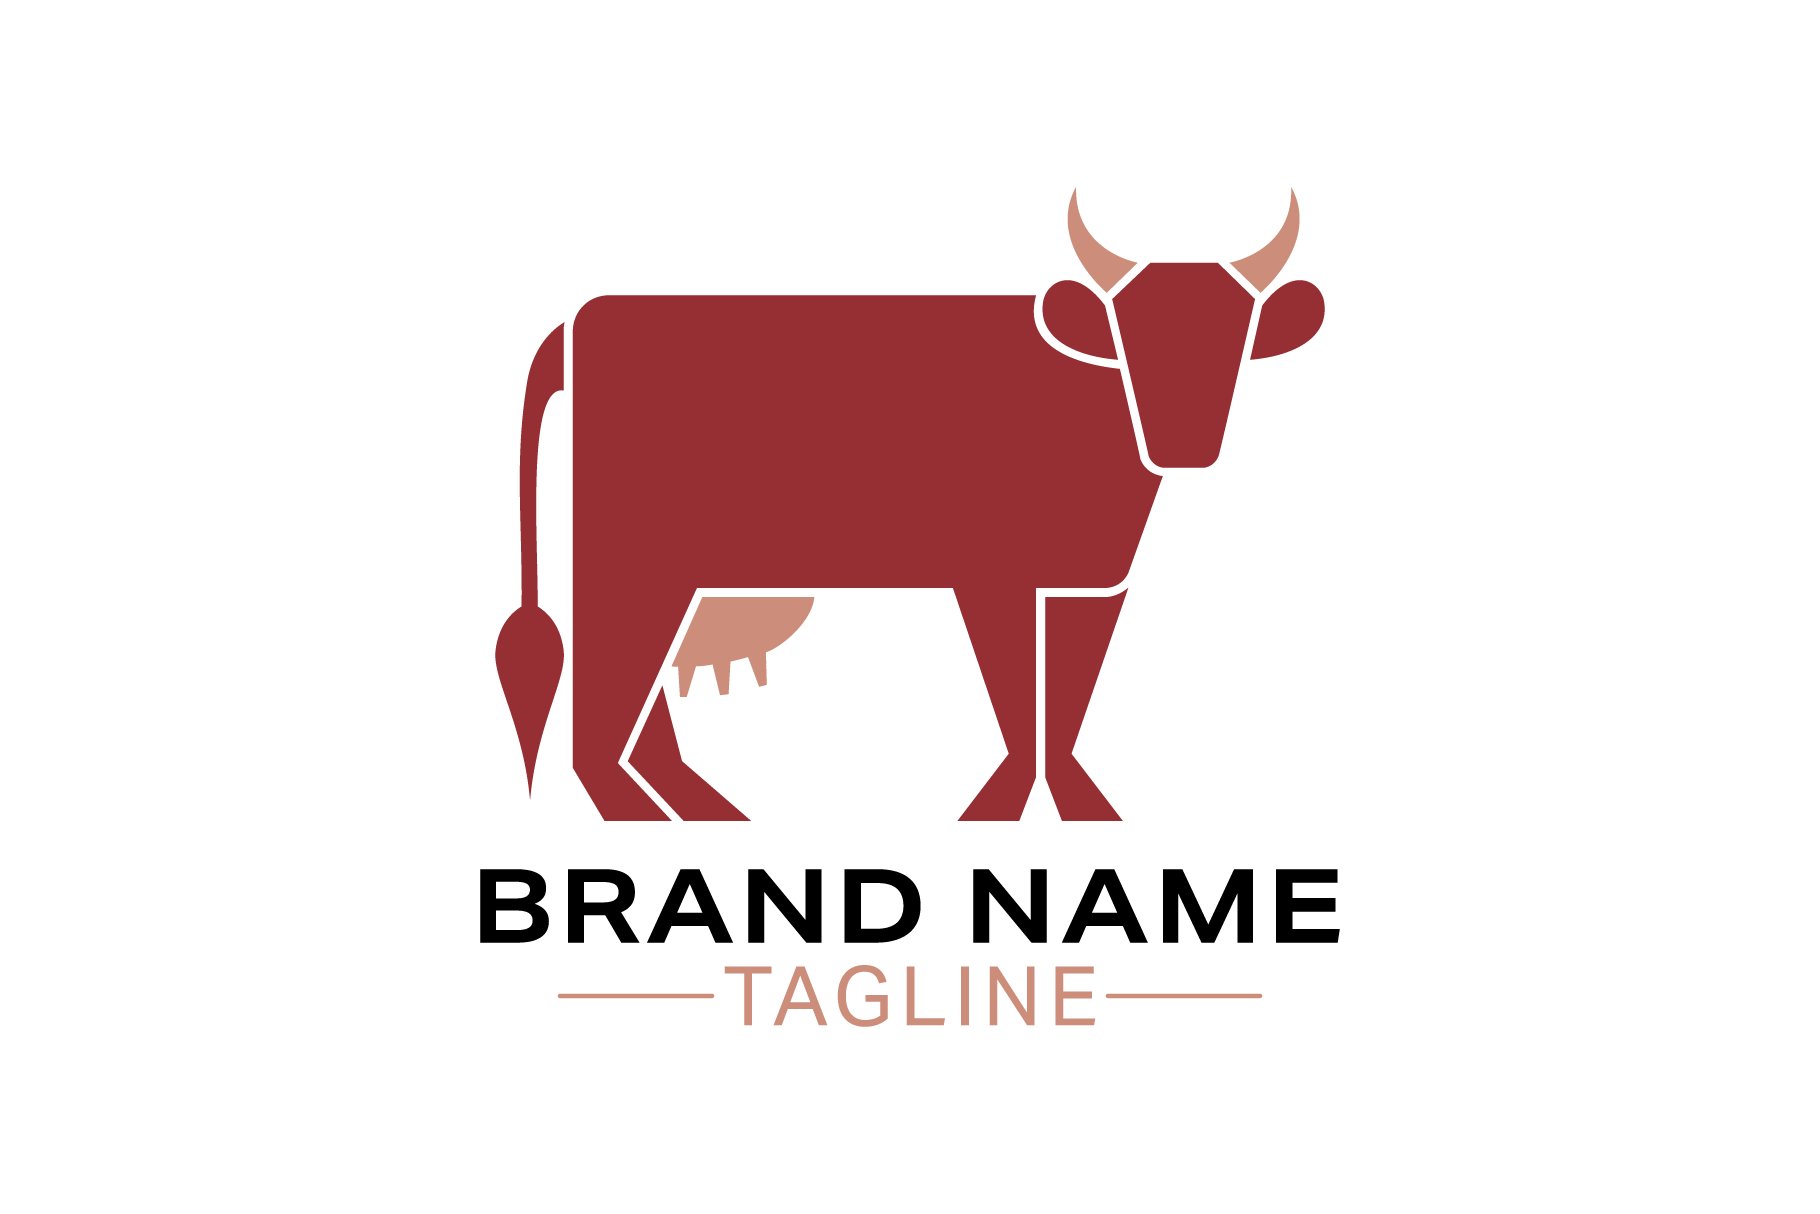 Big red cow for the logo.